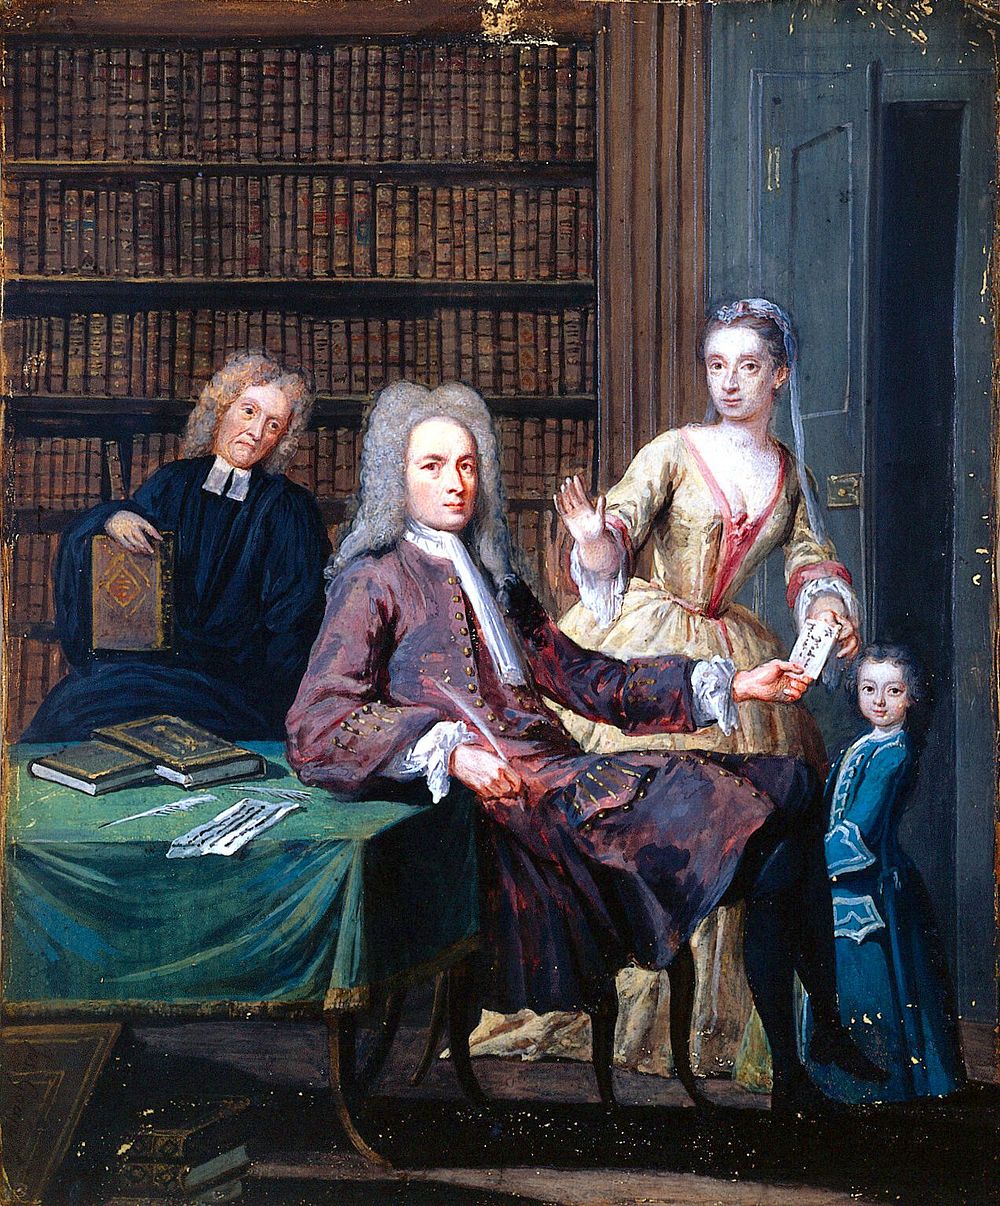 Jean Misaubin and his family. Gouache painting by Joseph Goupy, 172-.